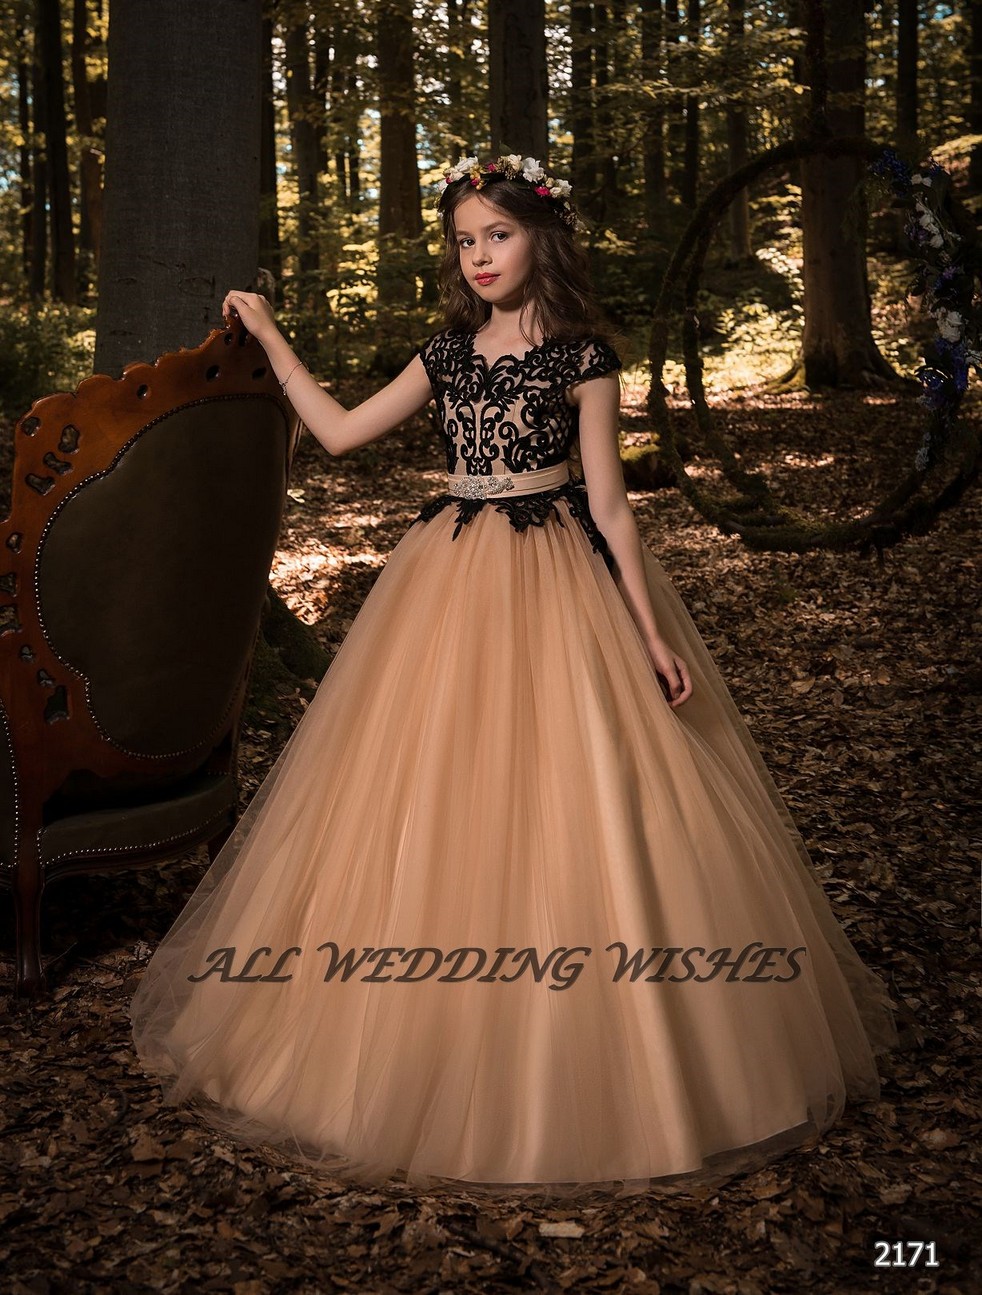 Style 18-2171 – All Wedding Wishes